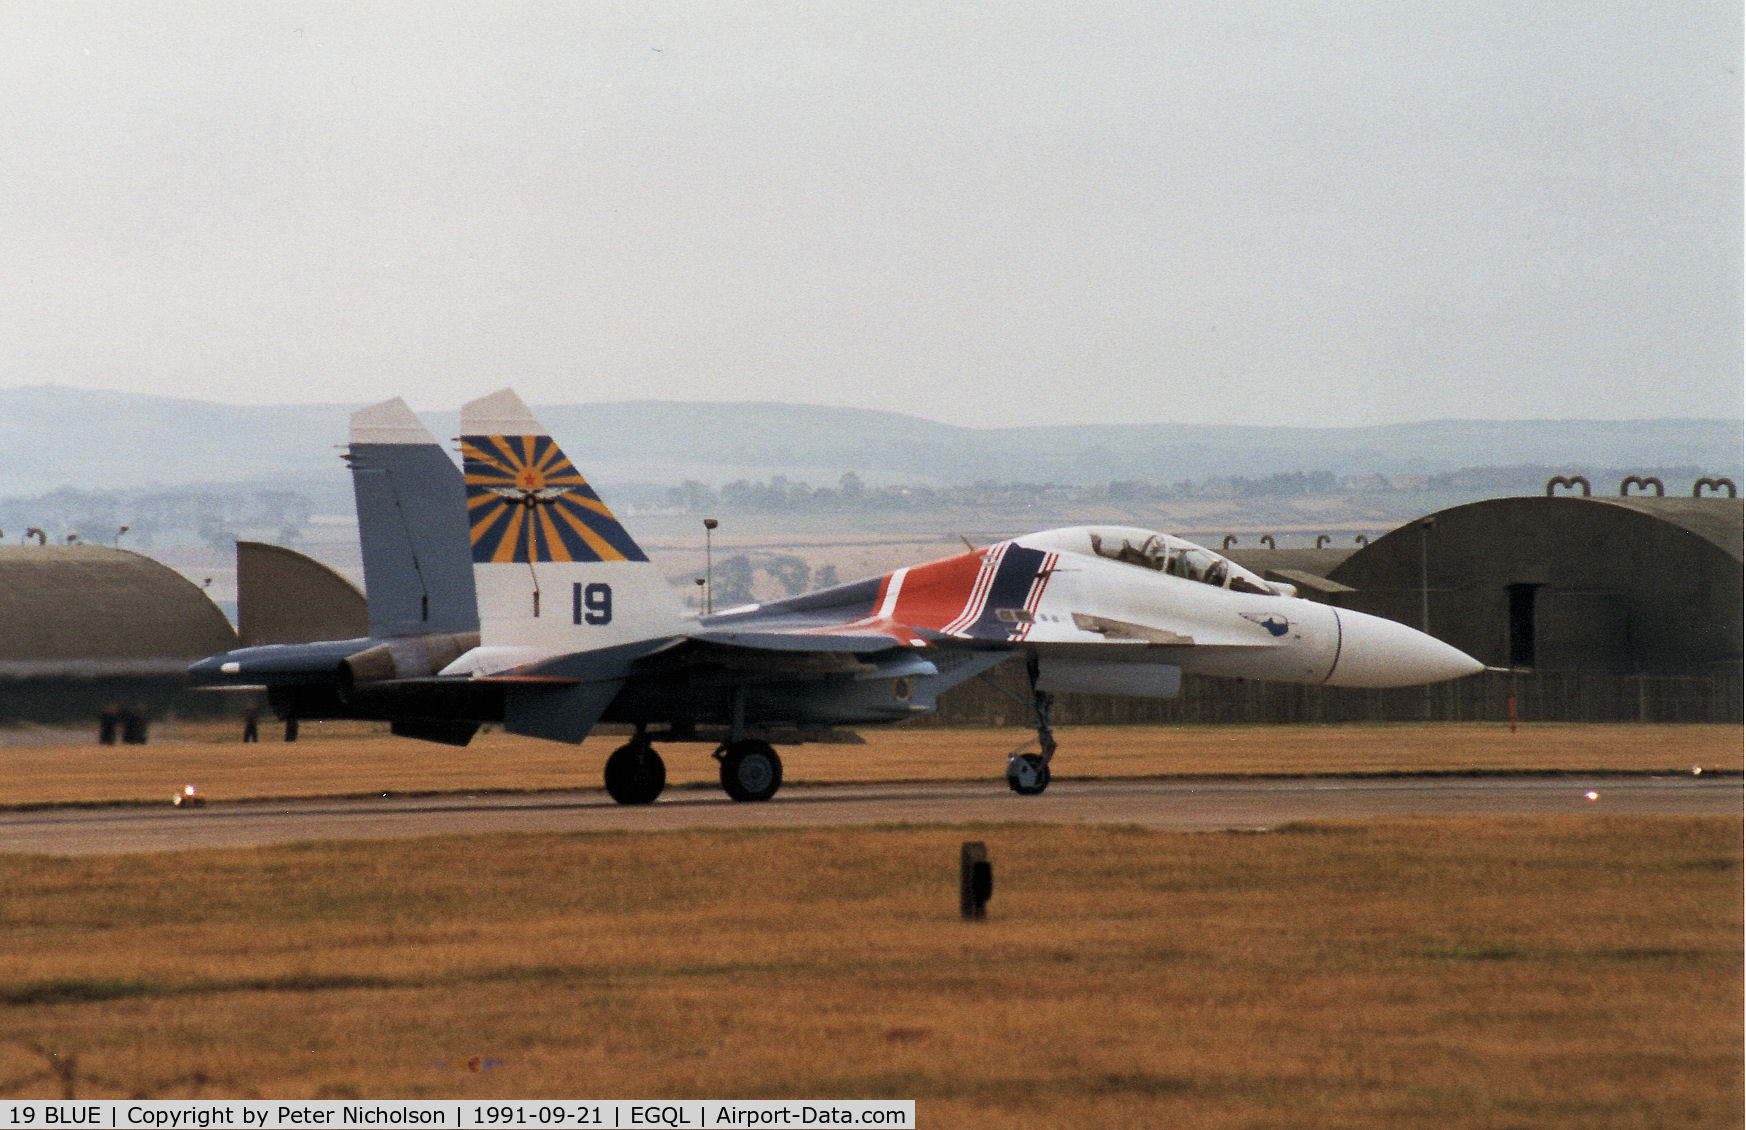 19 BLUE, Sukhoi Su-27UB C/N 1040807, Flanker C of the Russian Knights display team at the 1991 RAF Leuchars Airshow.